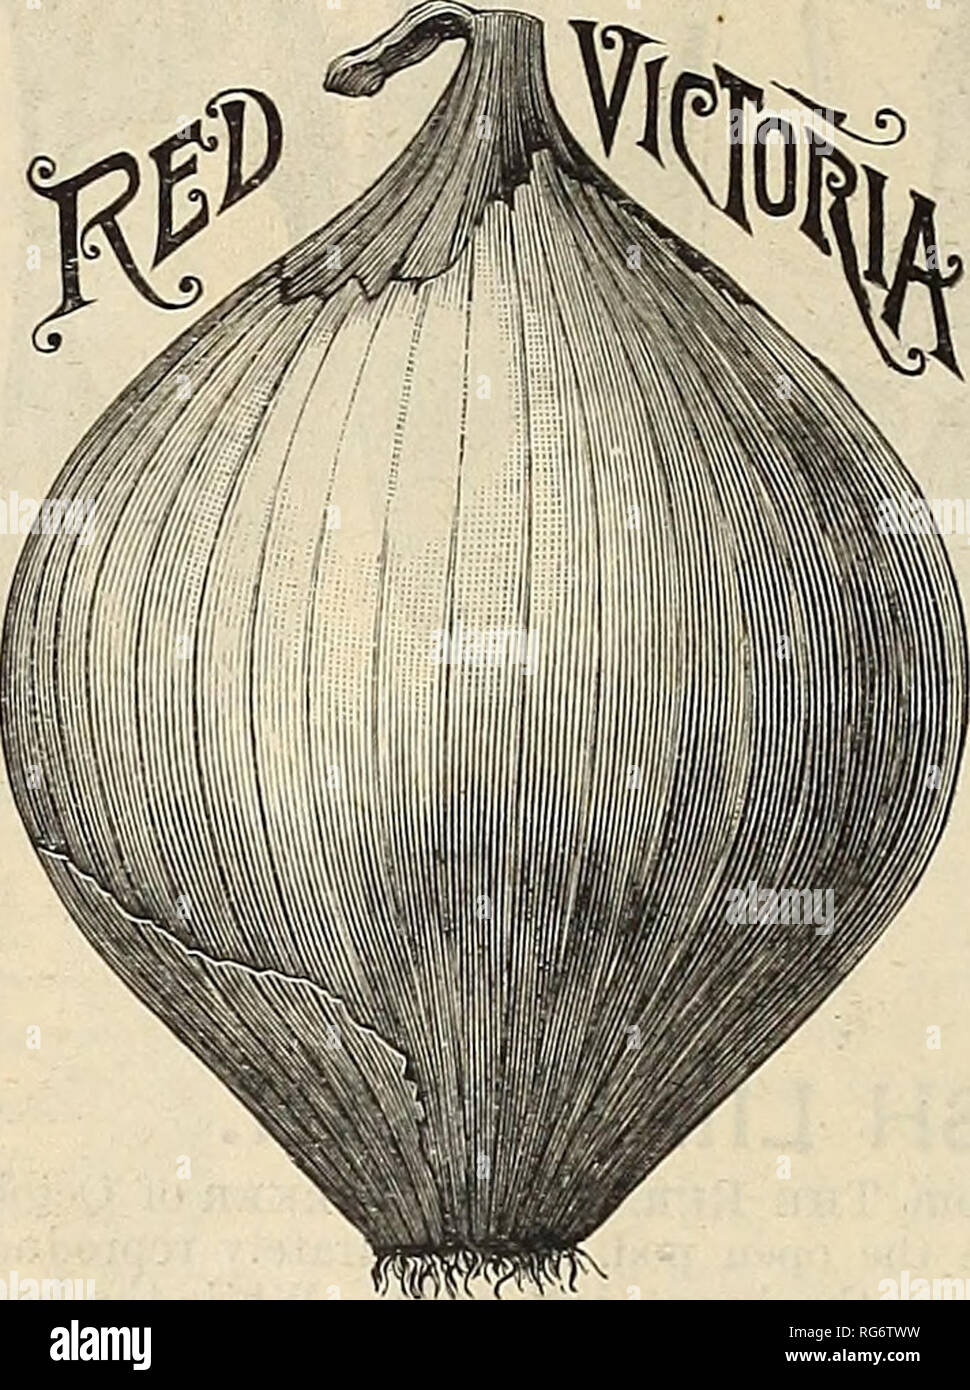 . Burpee's farm annual. Nursery stock Pennsylvania Philadelphia Catalogs; Flowers Pennsylvania Catalogs; Vegetables Pennsylvania Catalogs; Seeds Pennsylvania Catalogs. 28 W. ATLEE BURPEE &amp; CO., PHILADELPHIA. NEW VICTORIA ONIONS. A DISTINCT NEW RACE OF MAMMOTH ONIONS FROM SARDINIA. This distinct new race of Onions from Sardinia, of which we purchased the exclusive ovs^ner- ship while in Southern Europe in June, 1888, and offered for sale for the first time in 1889, has produced direct from seed bulbs of enormous size, as stated below. While we have received reports of WHITE VICTORIA ONIONS  Stock Photo